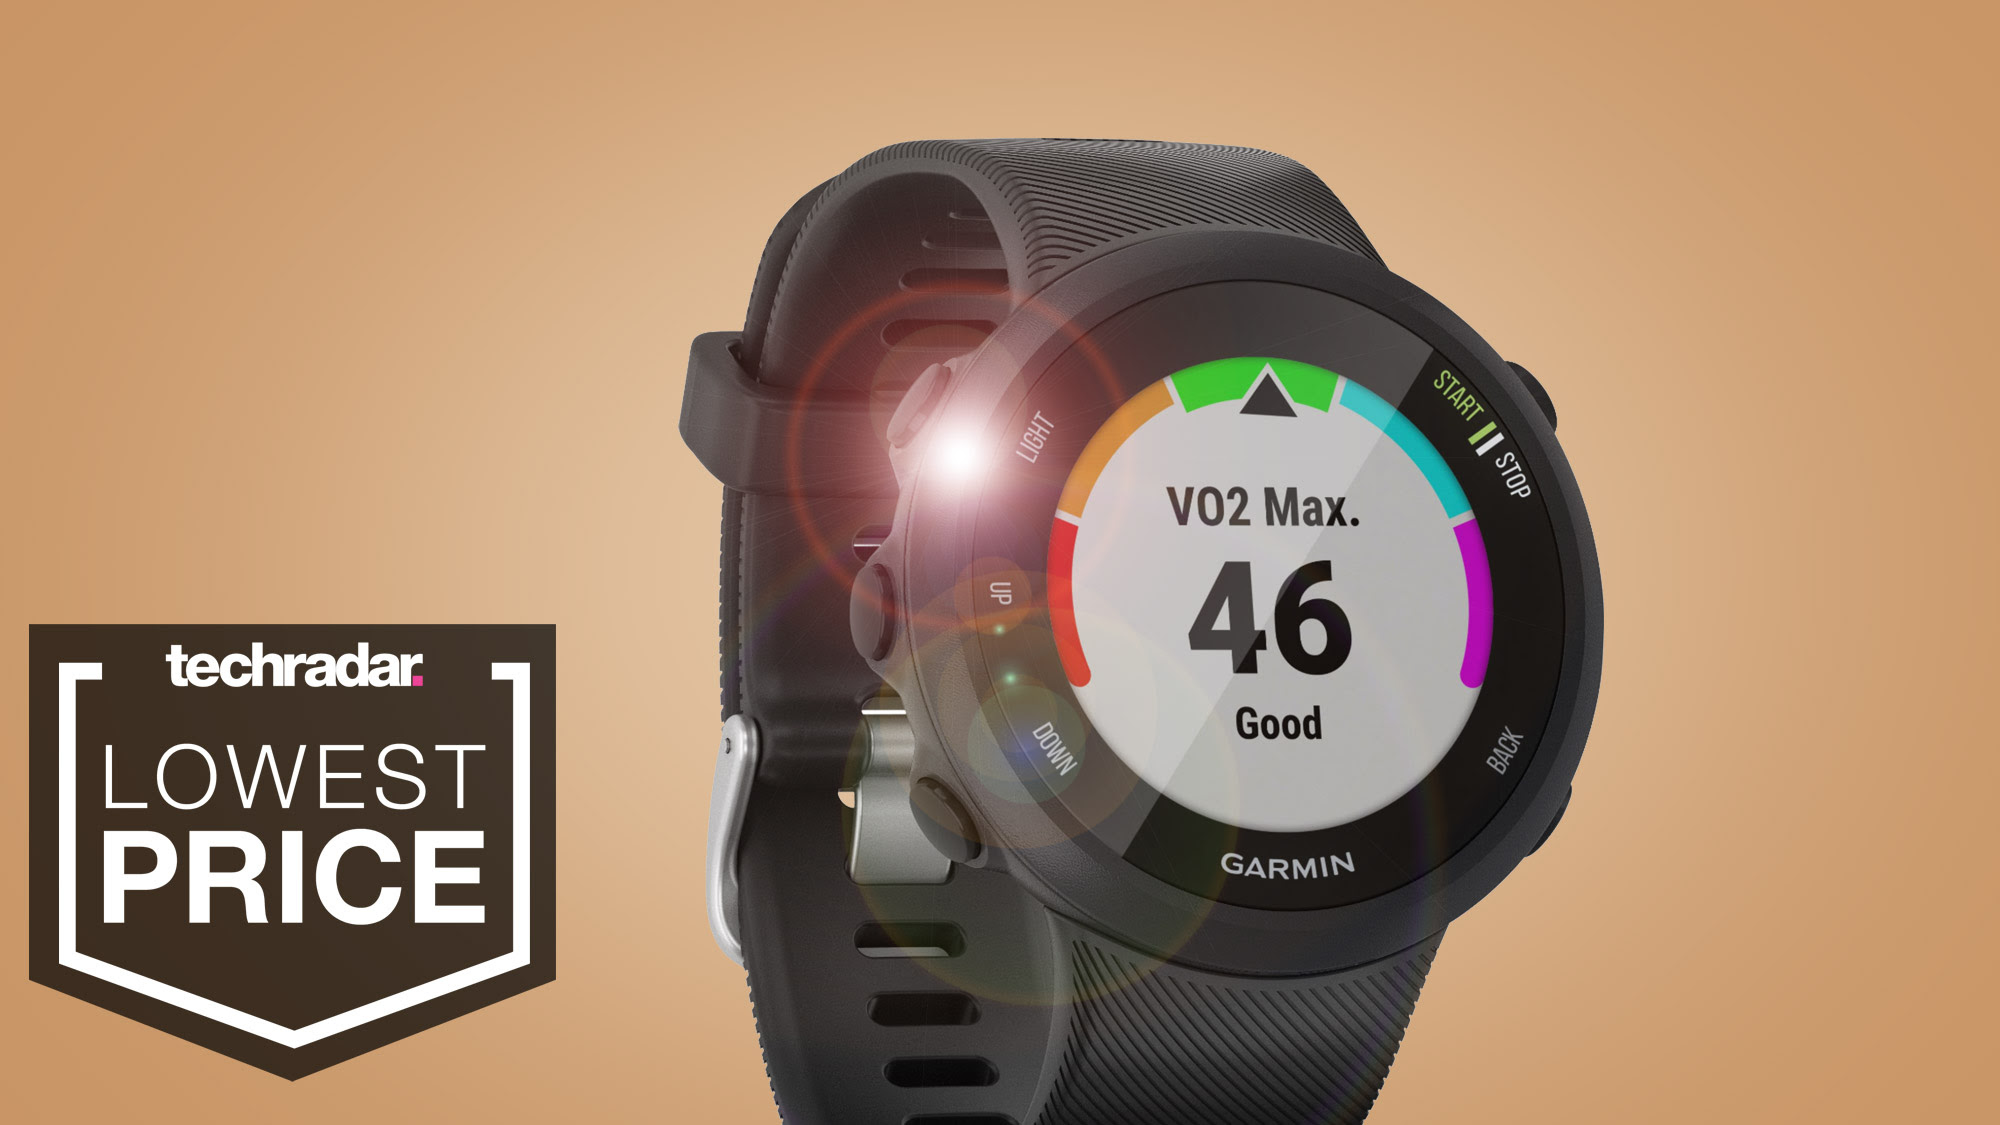 This is the Cyber Monday Garmin deal I'd get if I was just starting out running